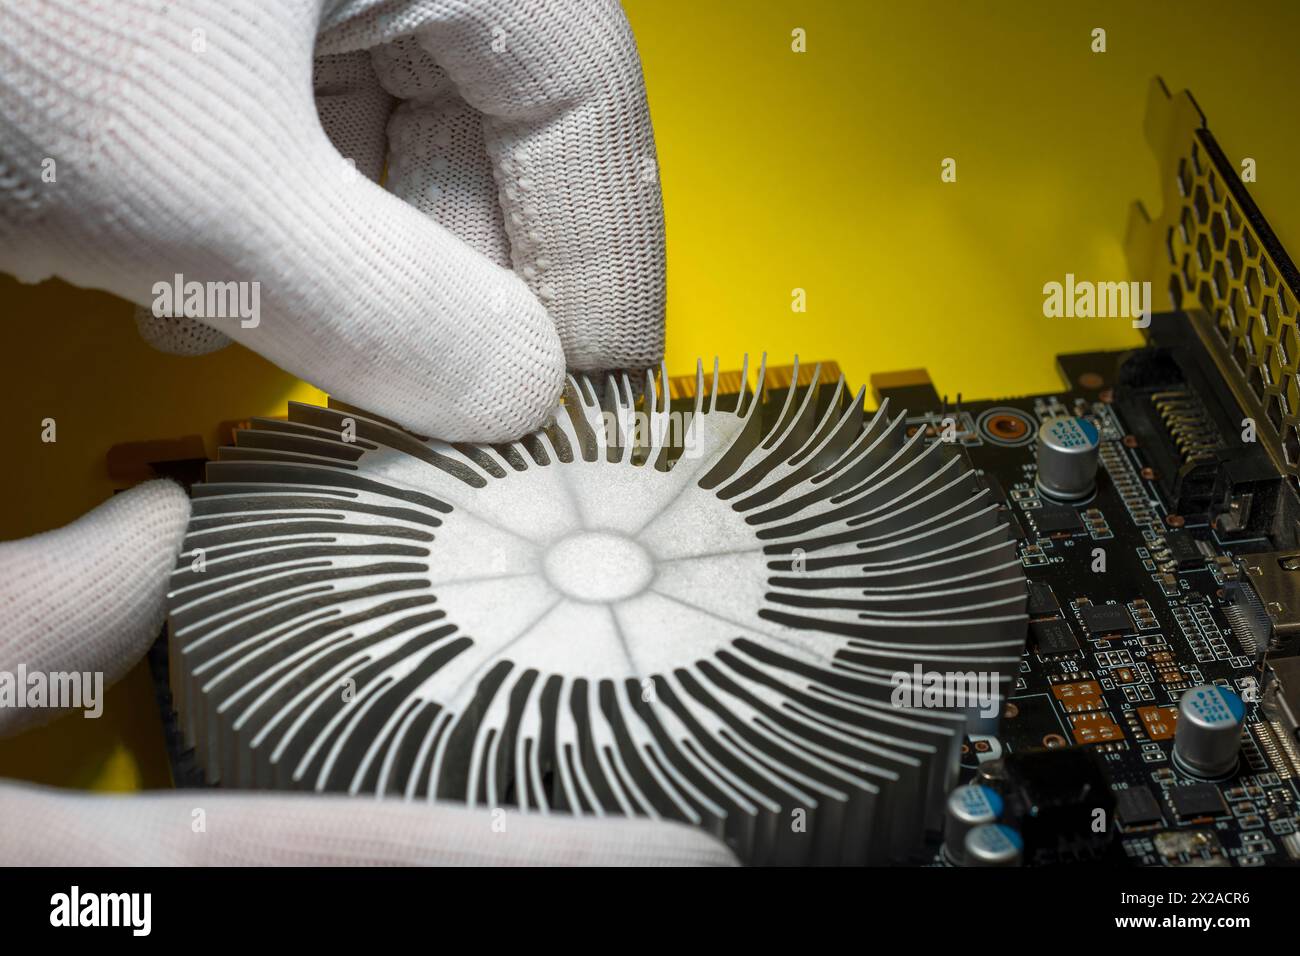 A technician in white antistatic gloves assembling cooling radiator onto the computer graphic card Stock Photo